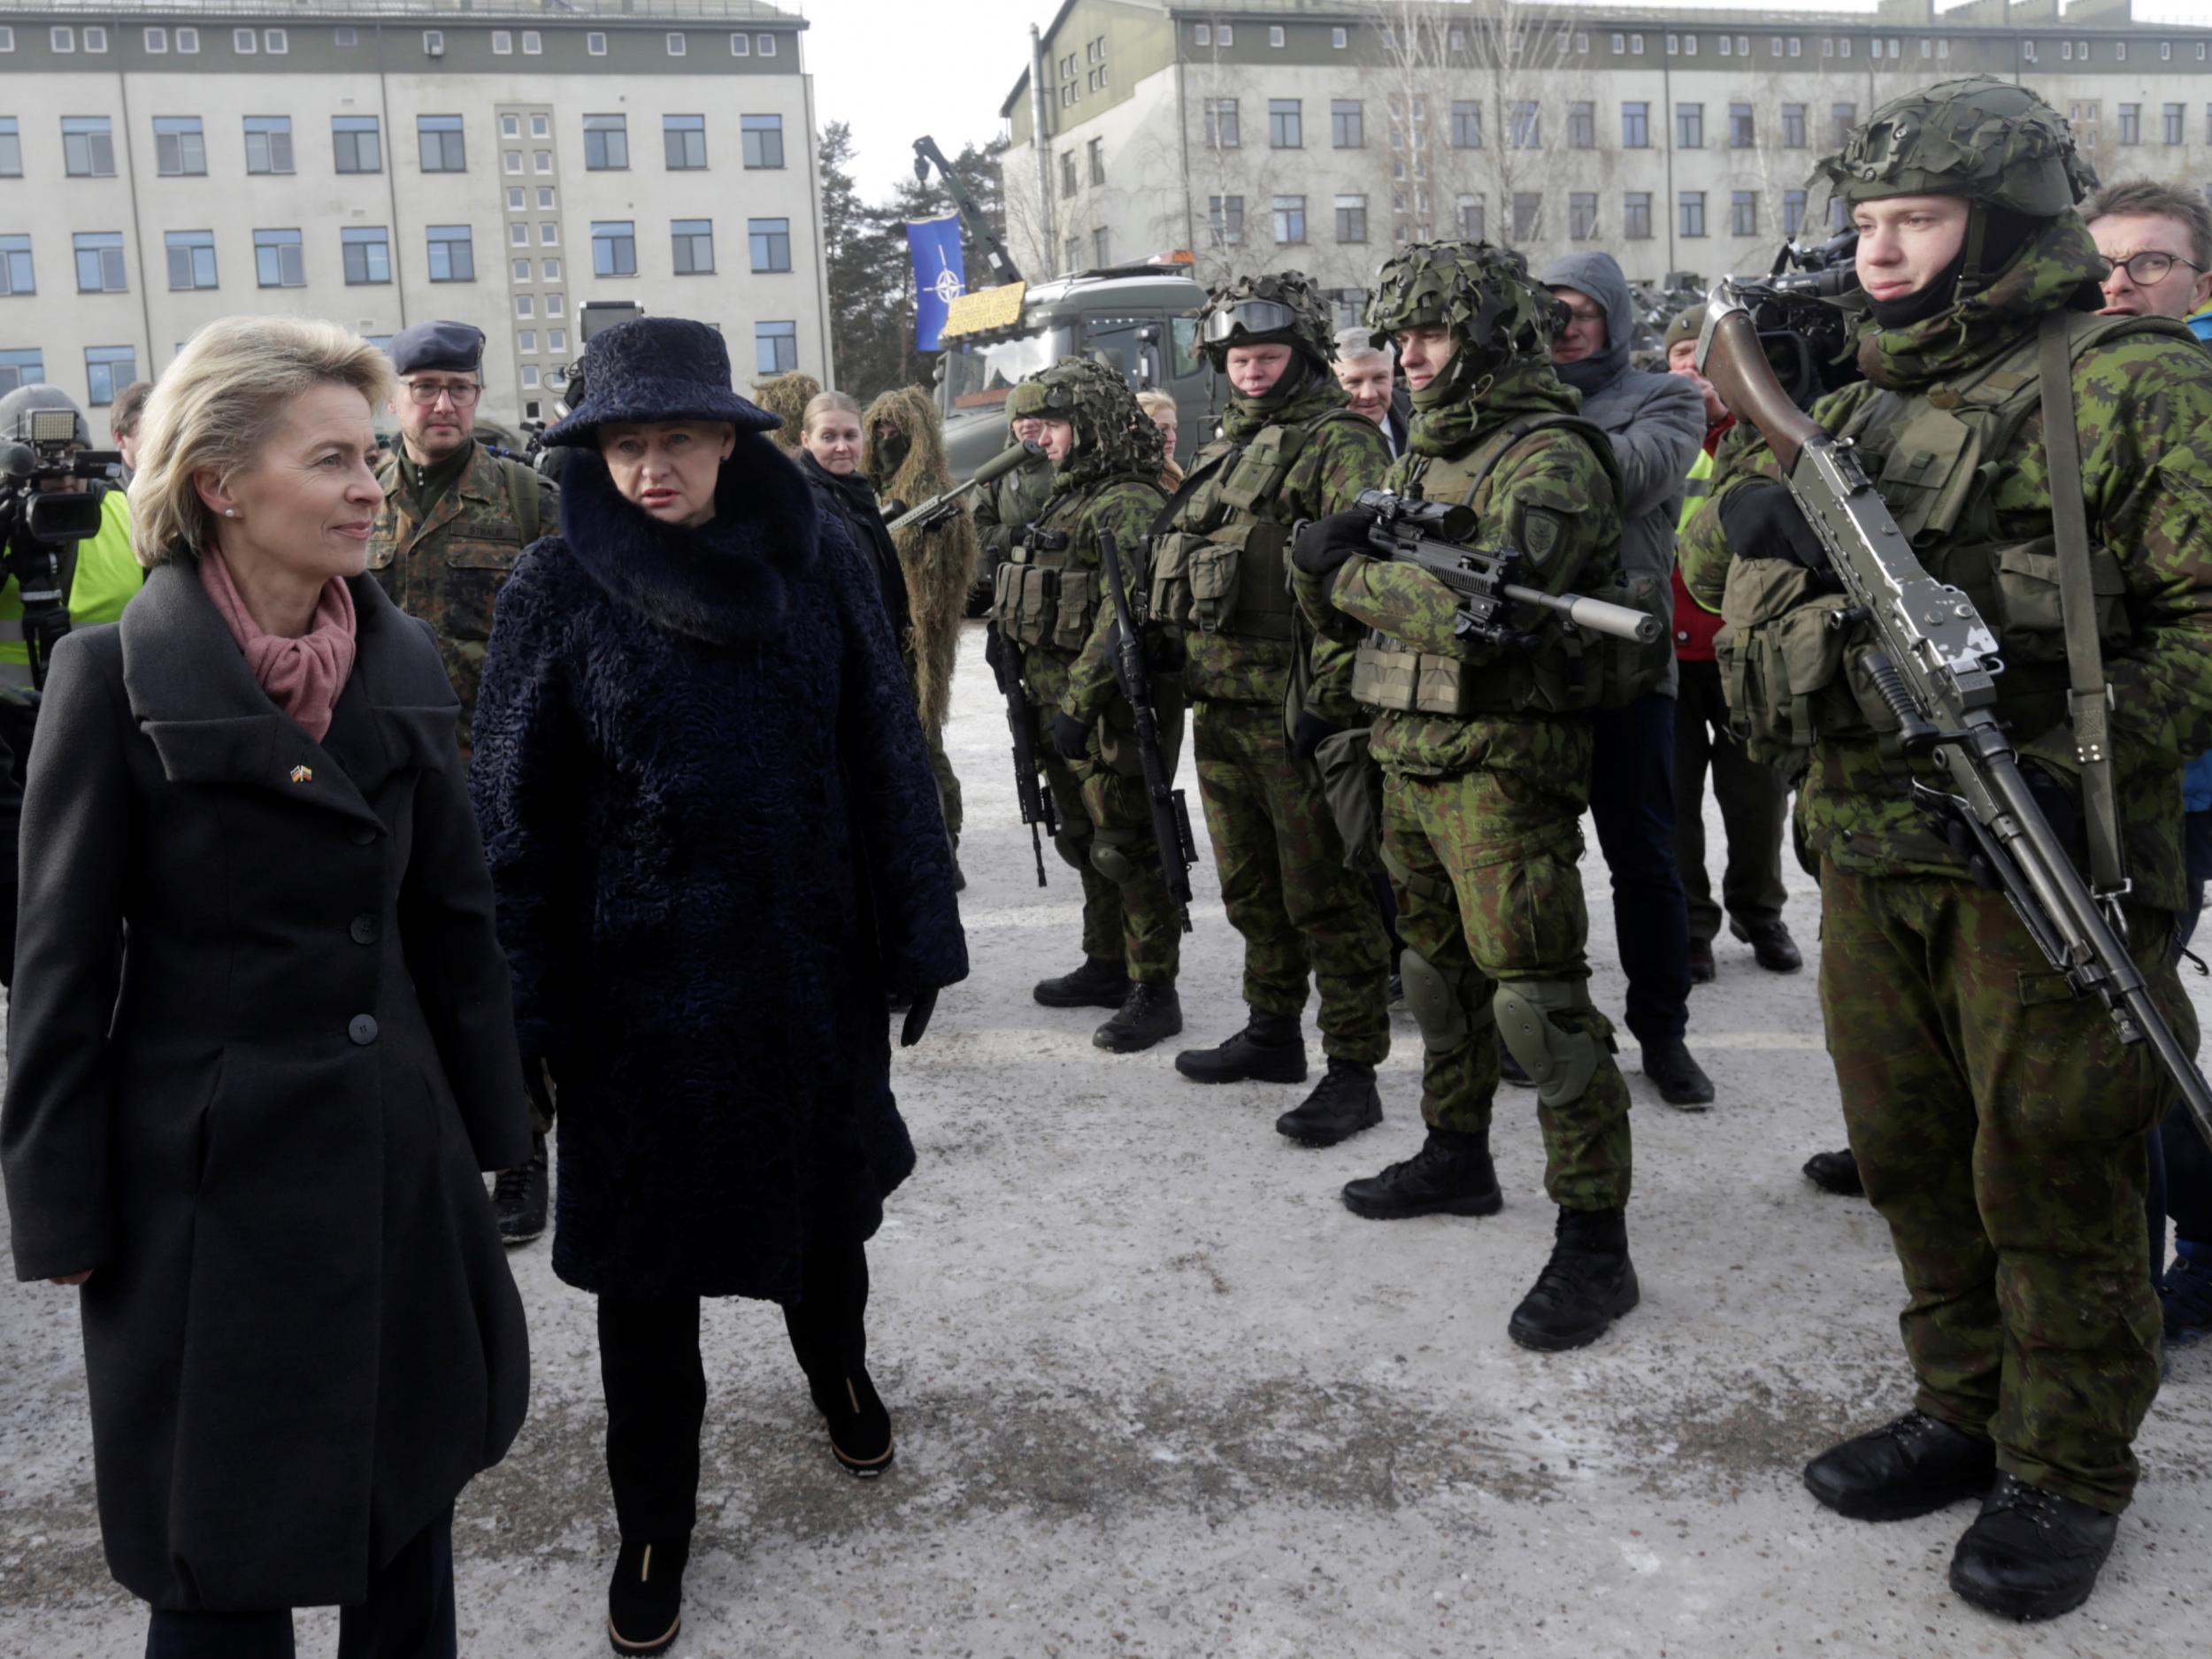 German Defence Minister Ursula von der Leyen and Lithuania's President Dalia Grybauskaite attend a ceremony to welcome the German battalion being deployed to Lithuania as part of Nato deterrence measures against Russia in Rukla on February 7 2017